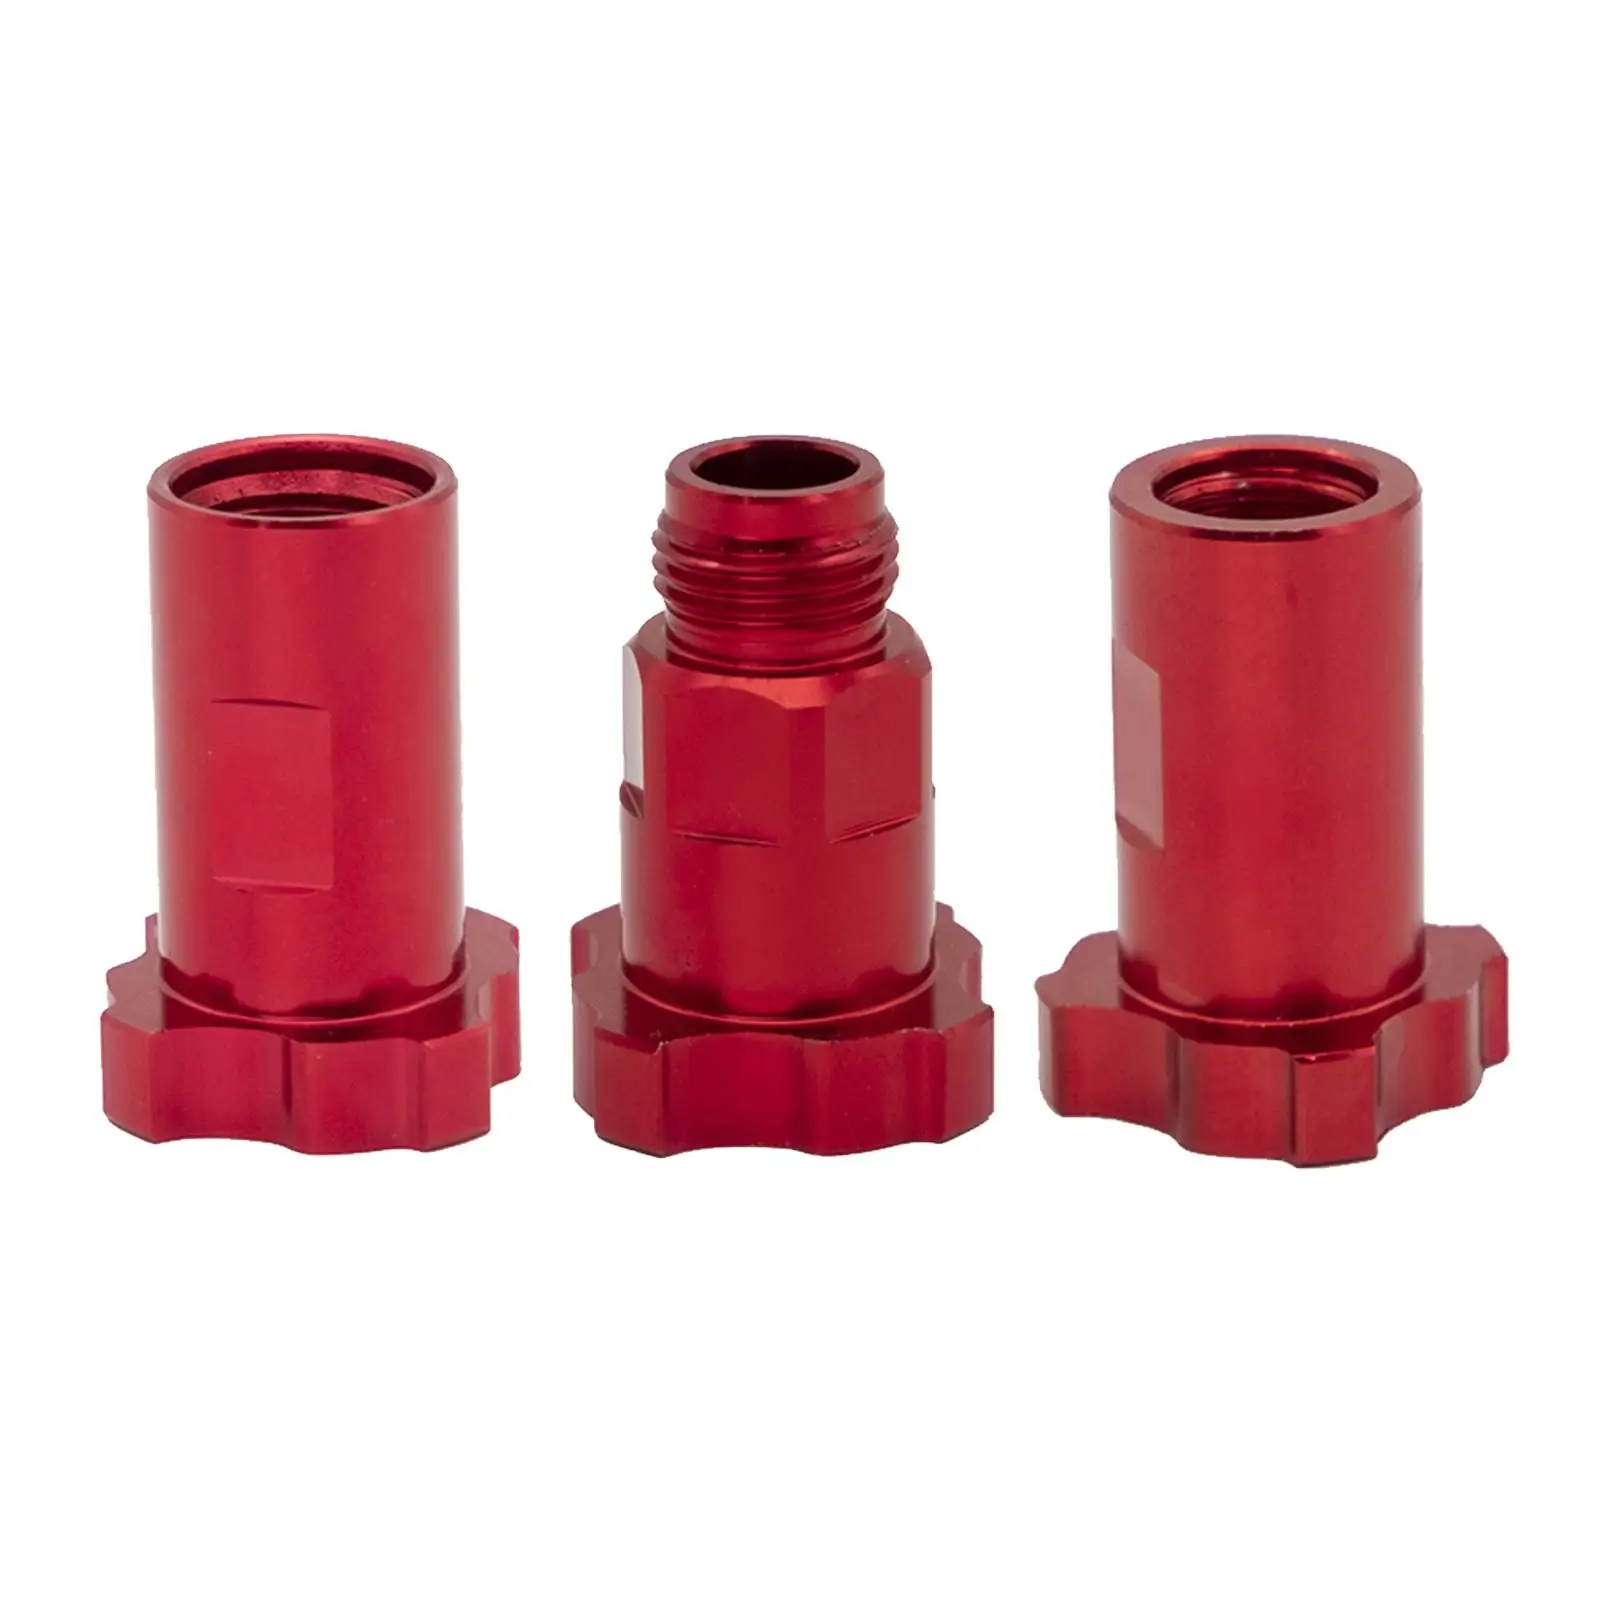 Spray Cup Adapter Outlet Red Spray Connector Adapter for Spray Disposable Measuring Cup